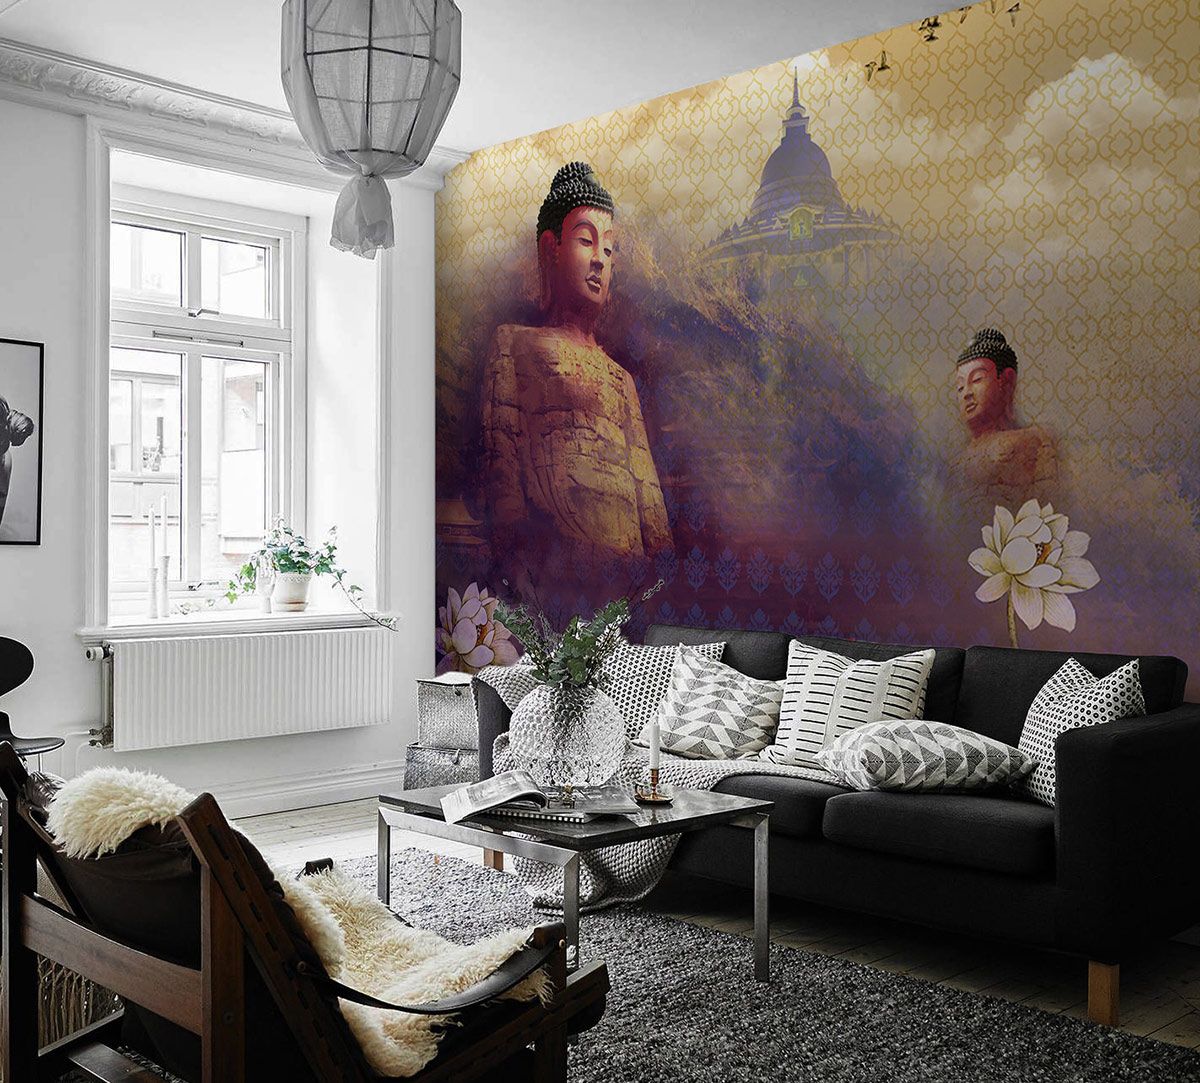 Buy Style UR Home 3D wallpaper  Lord Buddha with tree Wallpaper 18 x 24  Non Tearable High Quality  Vastu Complaint Wall Poster Online  Get 29 Off